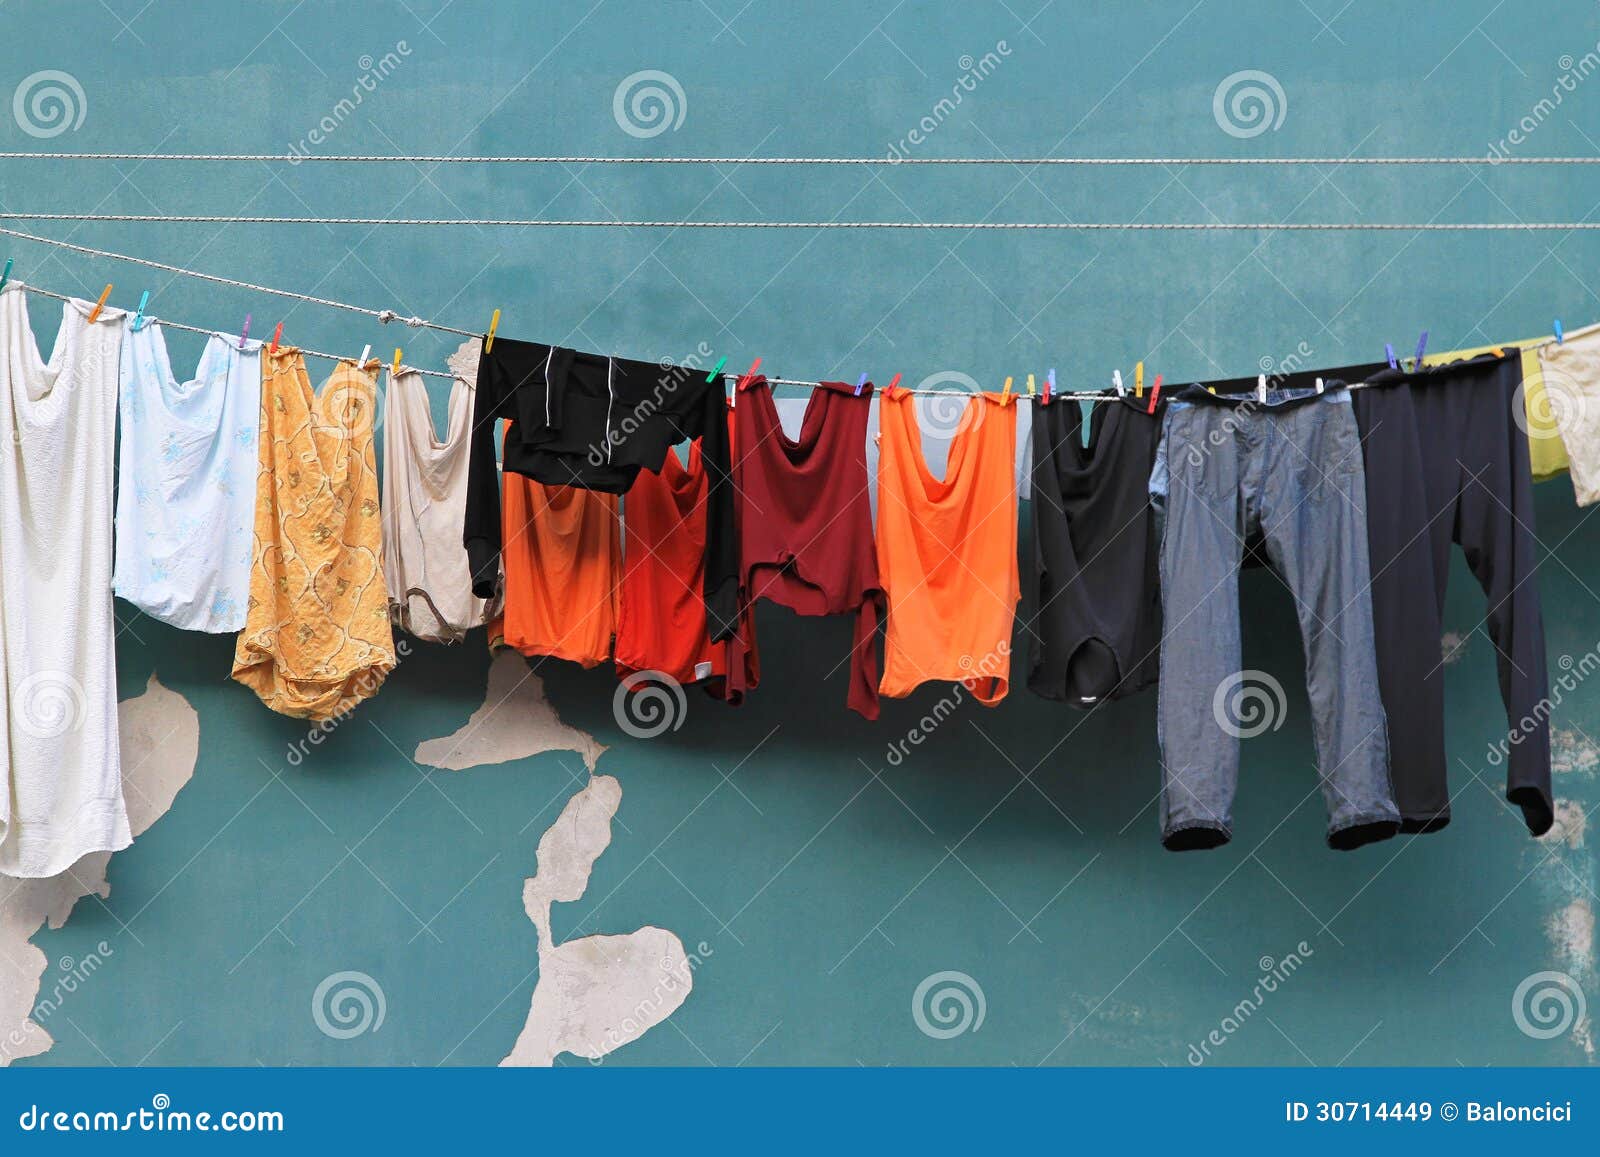 Clothes line stock image. Image of laundry, pants, shirts - 30714449